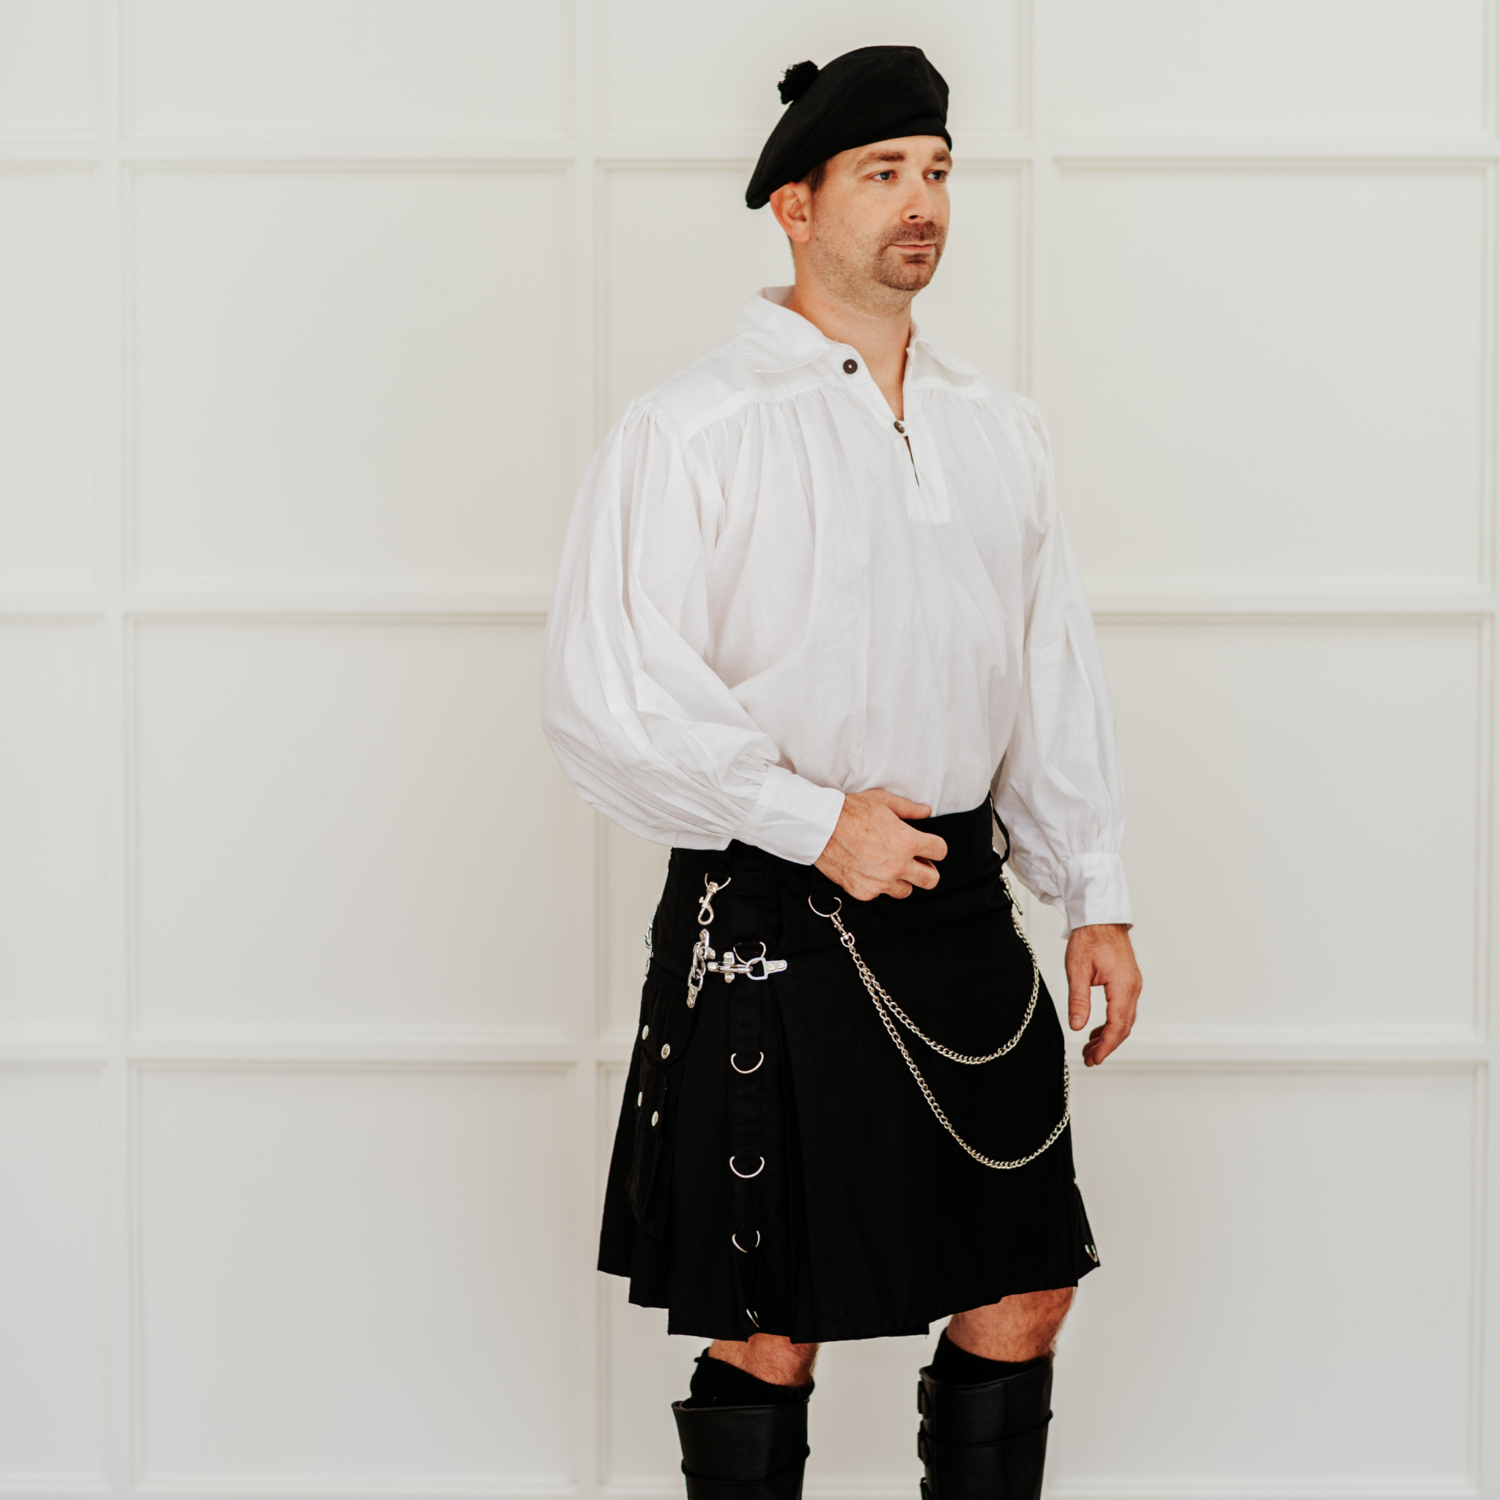 Rustic Historic Highland Lace-Up Kilt Shirt Made With Sturdy Cotton